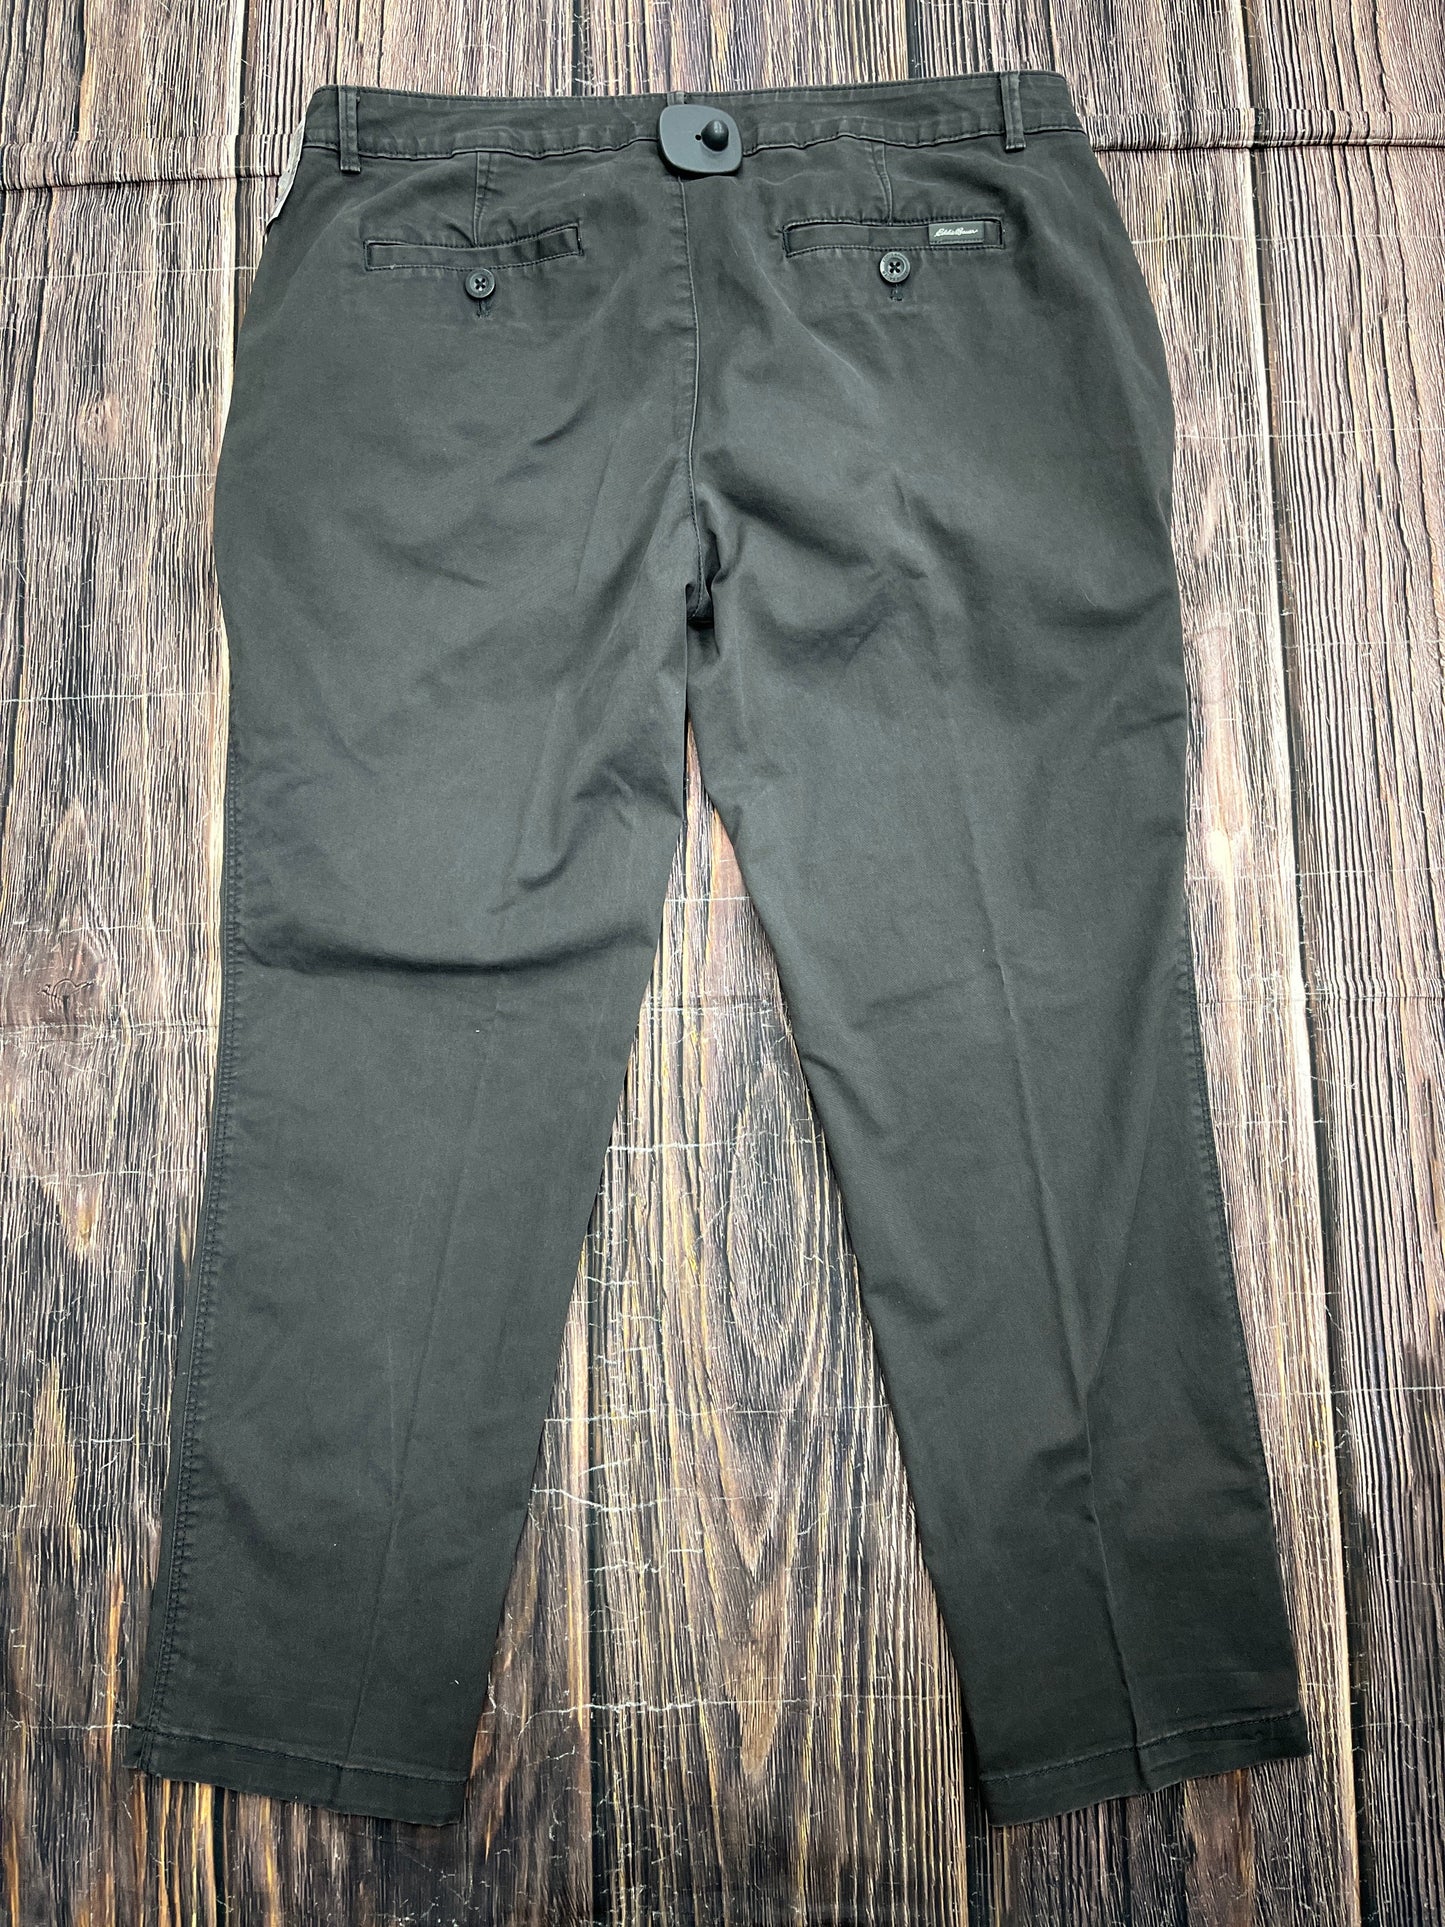 Pants Other By Eddie Bauer  Size: 14petite